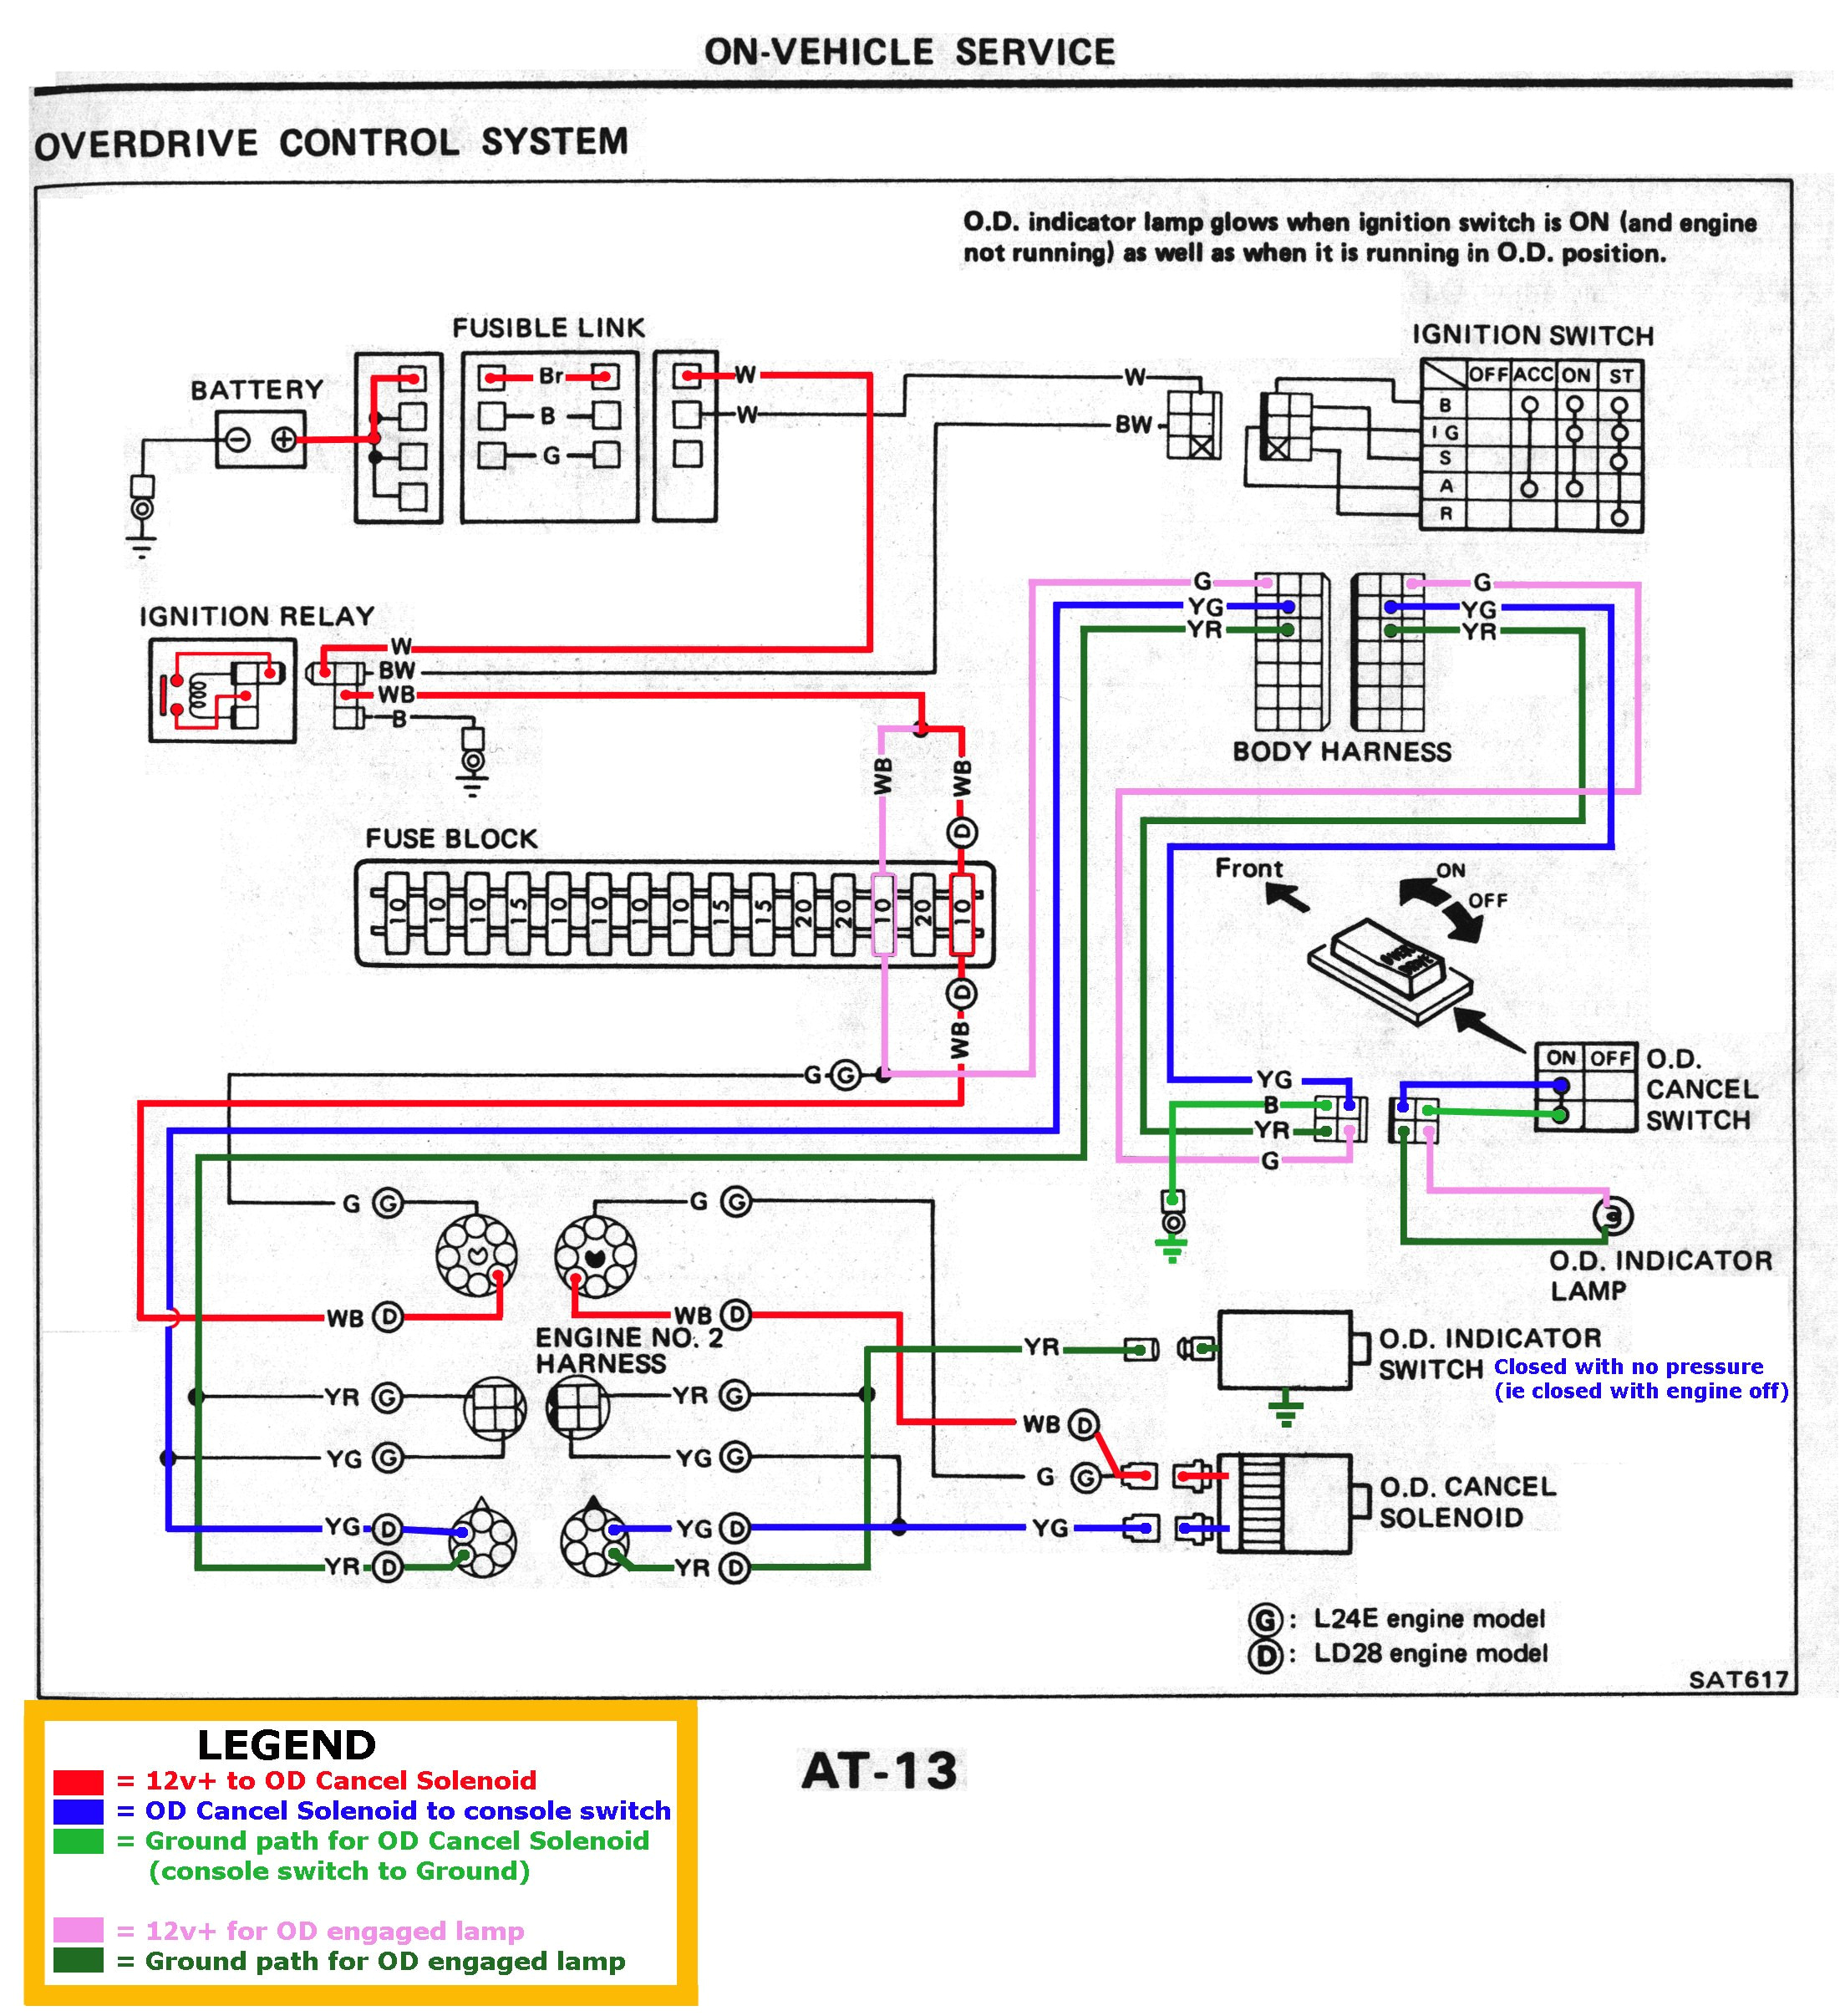 ignition coil location on 1998 nissan sentra free download wiring ignition coil location on 1998 nissan sentra free download wiring